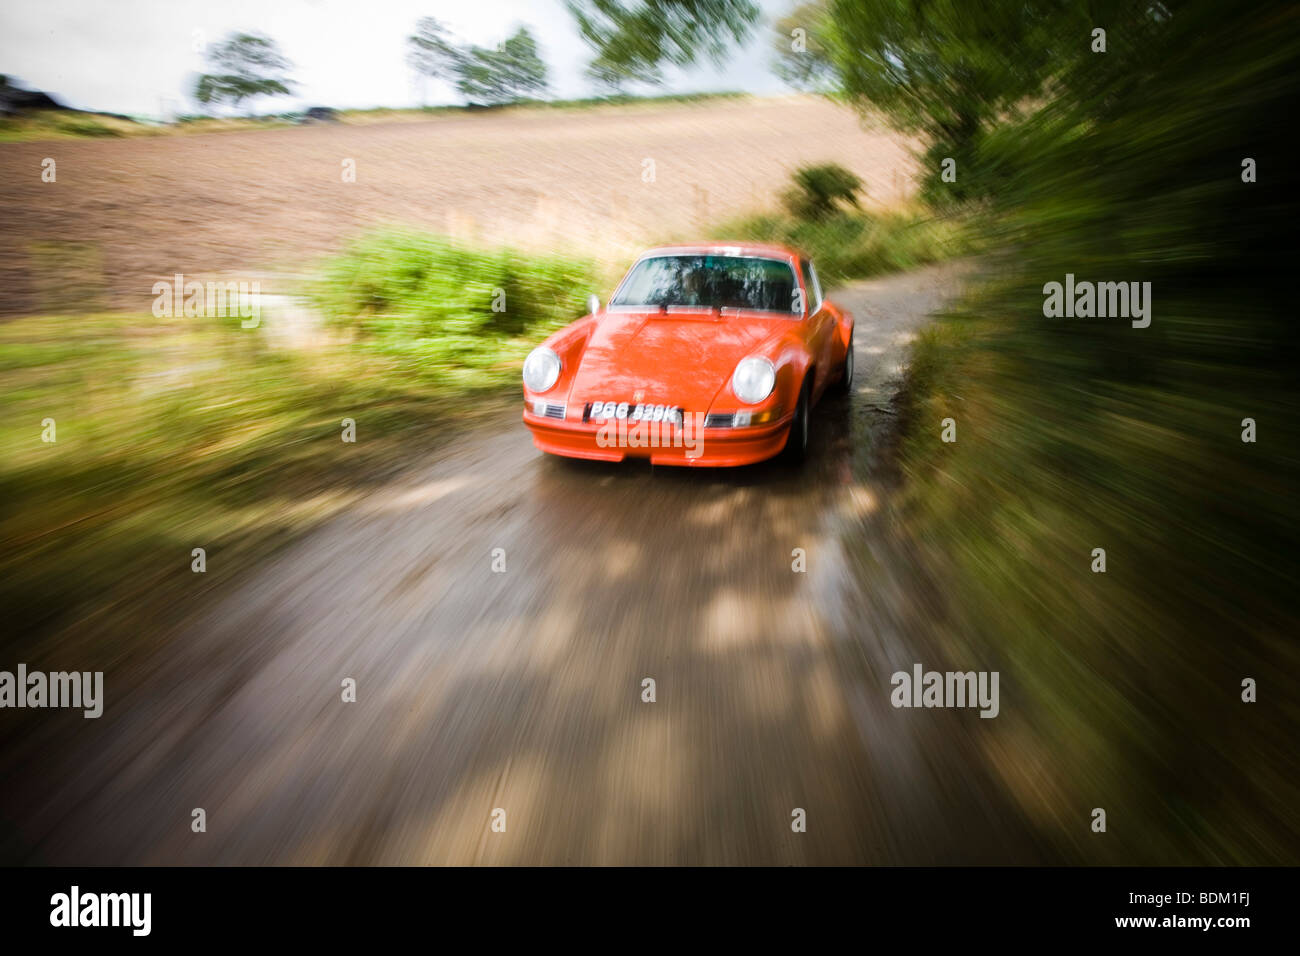 Porsche 911s driving down a country lane with a water splash Stock Photo